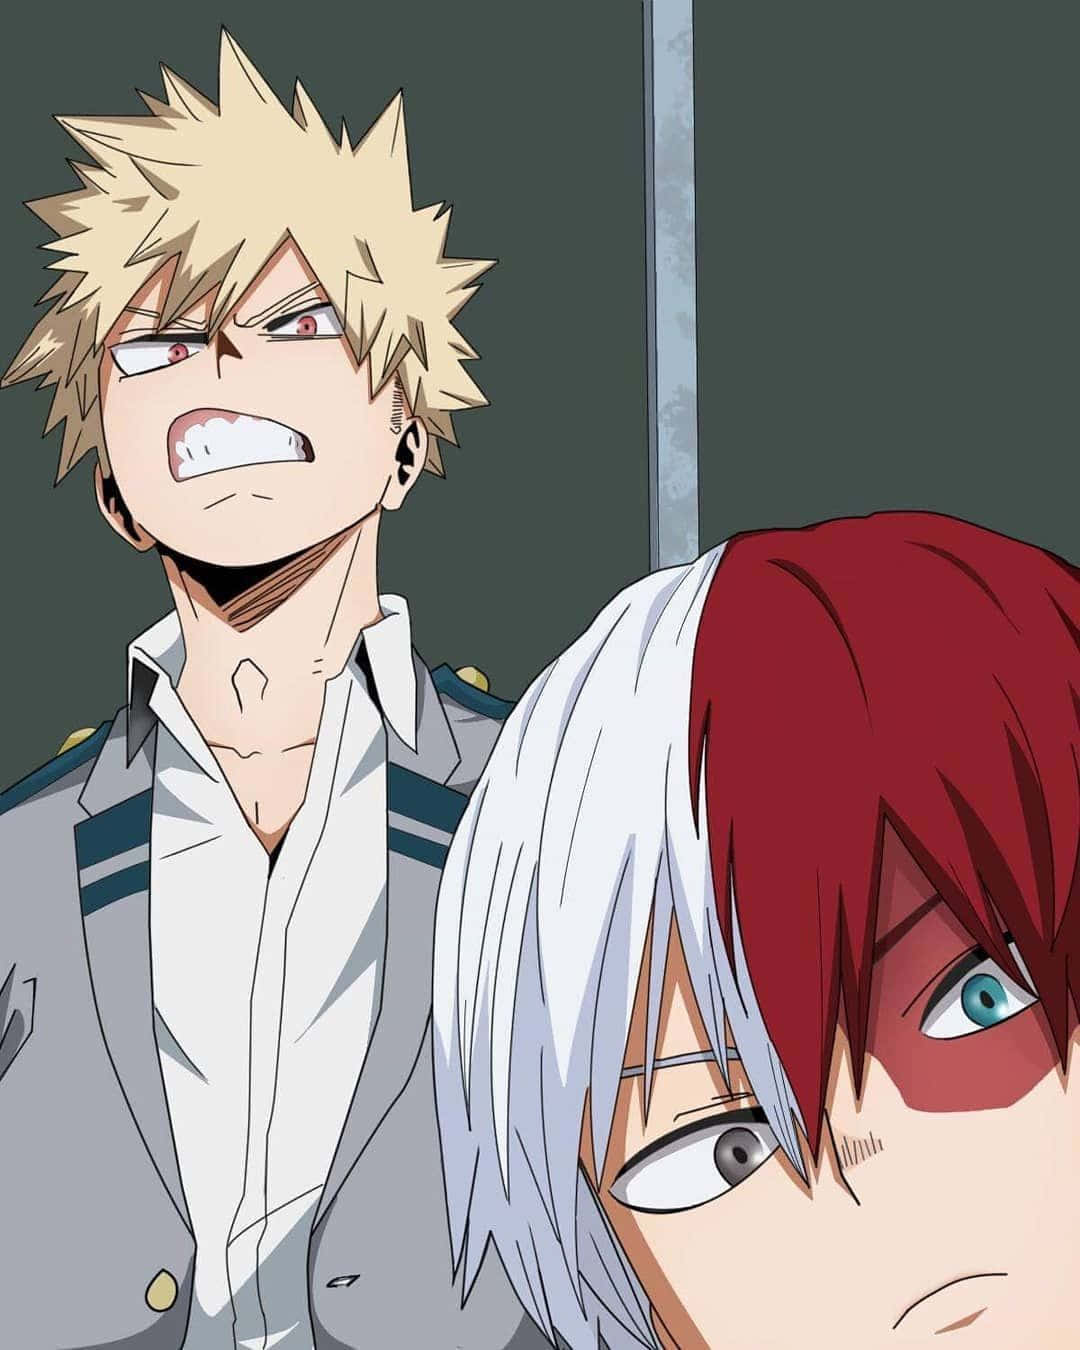 A young adult exploring the possibilities of Todobaku Wallpaper